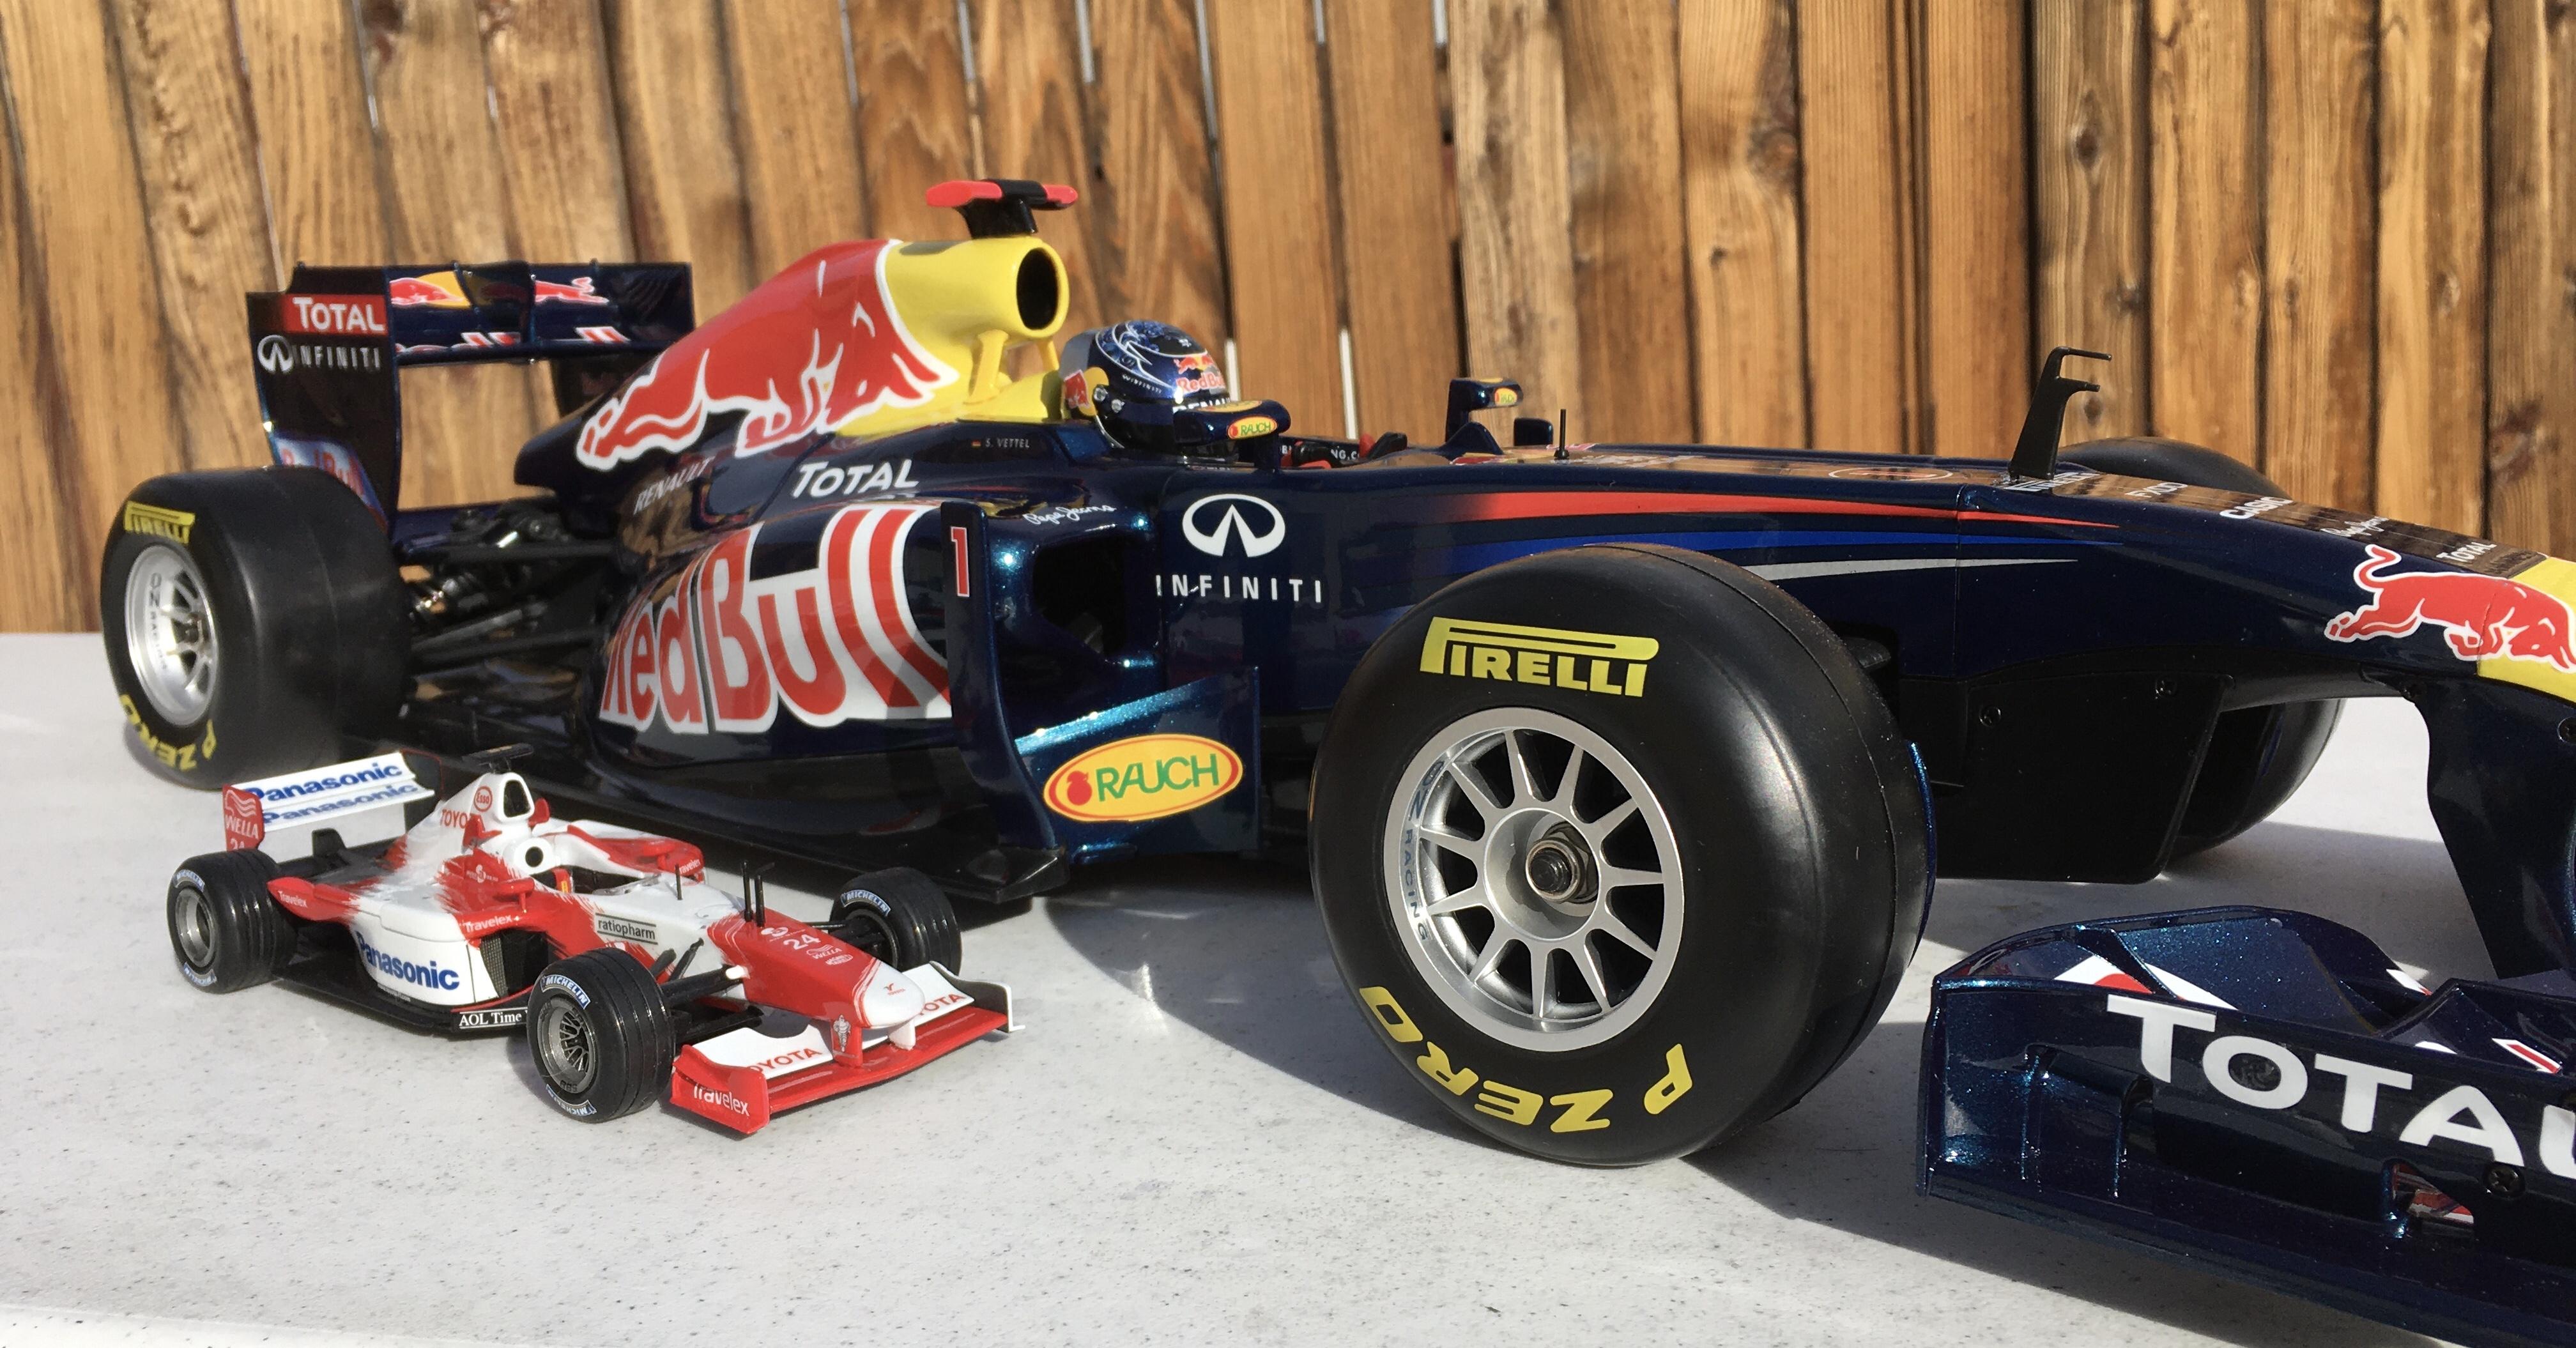 Red Bull RB7 - Other Racing: Road Racing, Salt Flat Racers - Model Cars  Magazine Forum